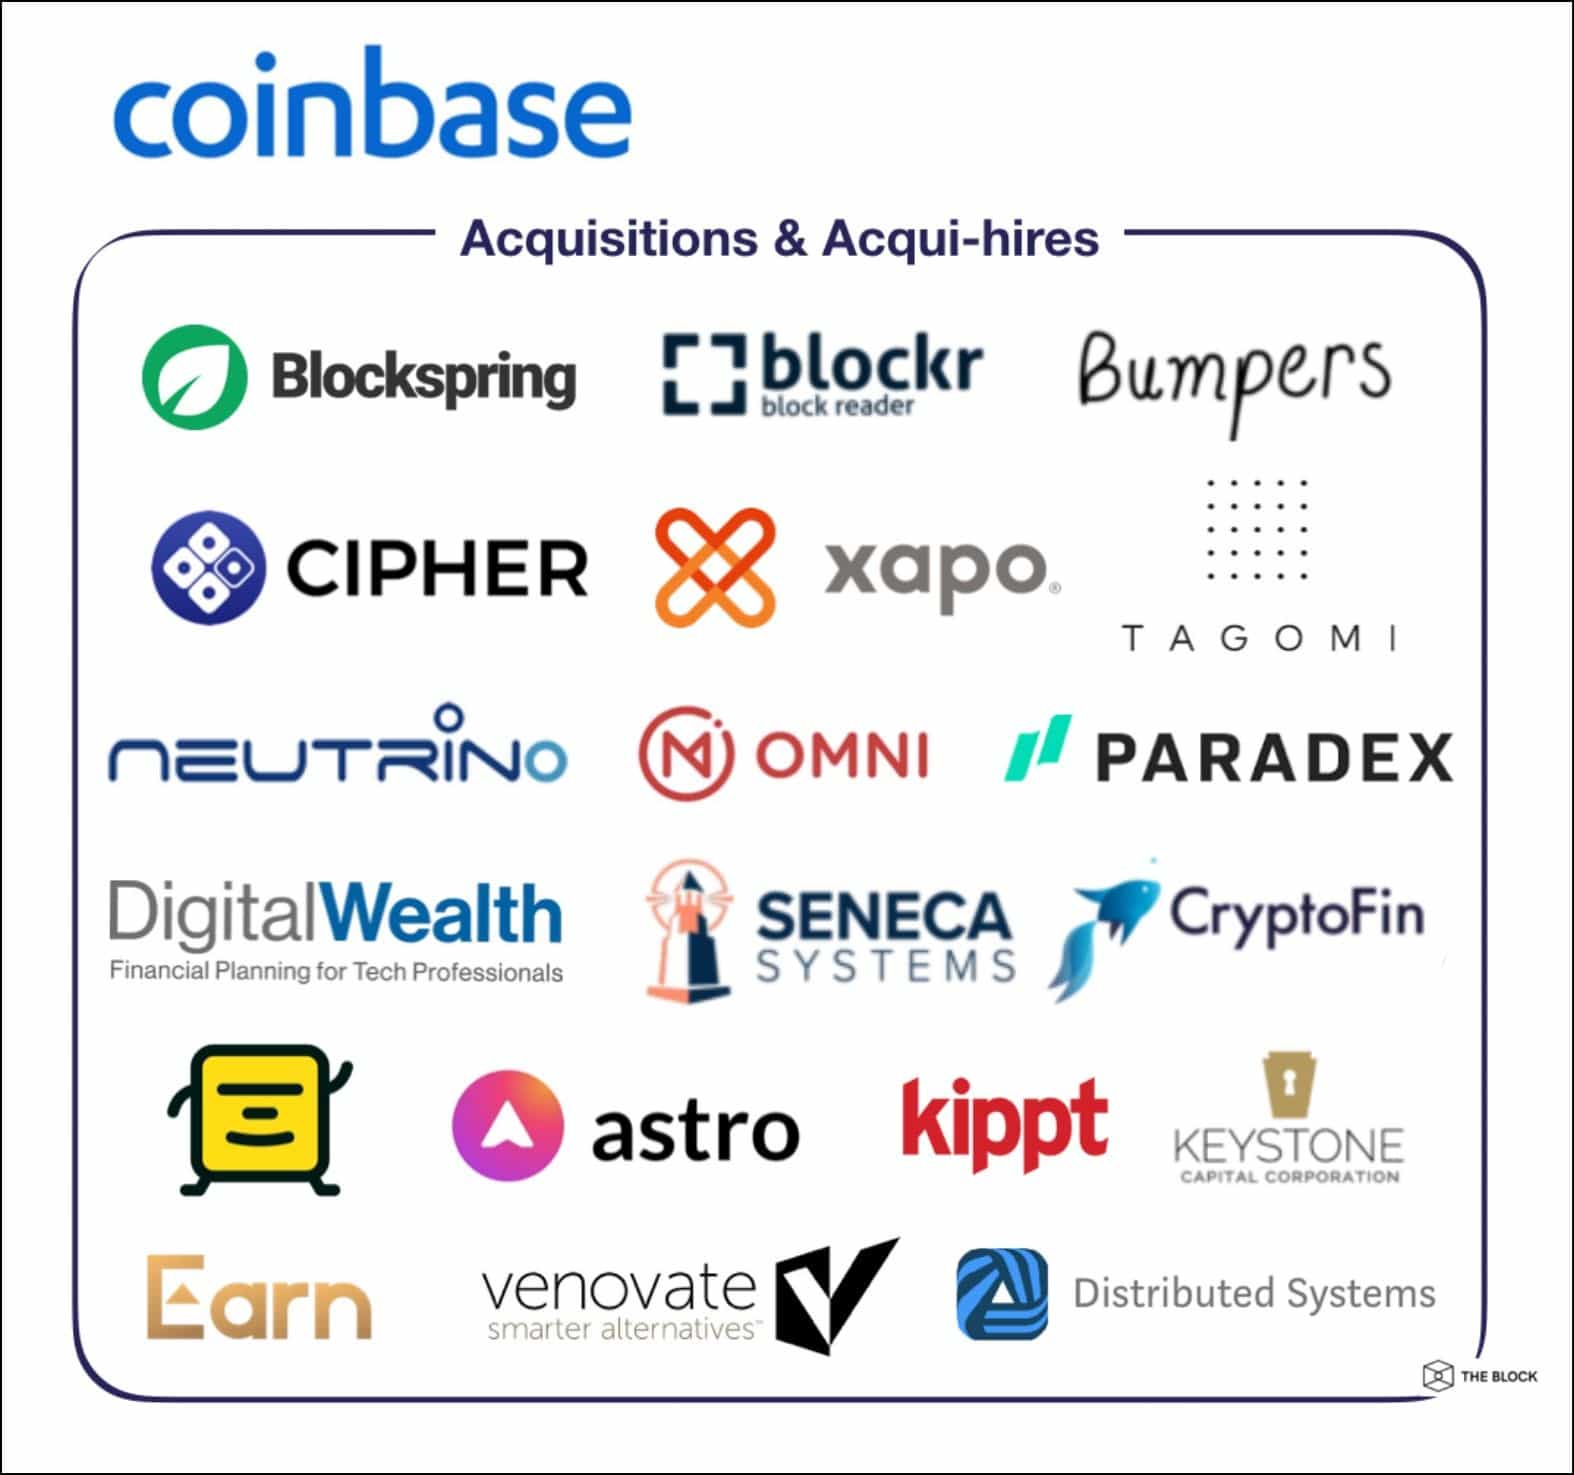 Coinbase acquisitions.jpg